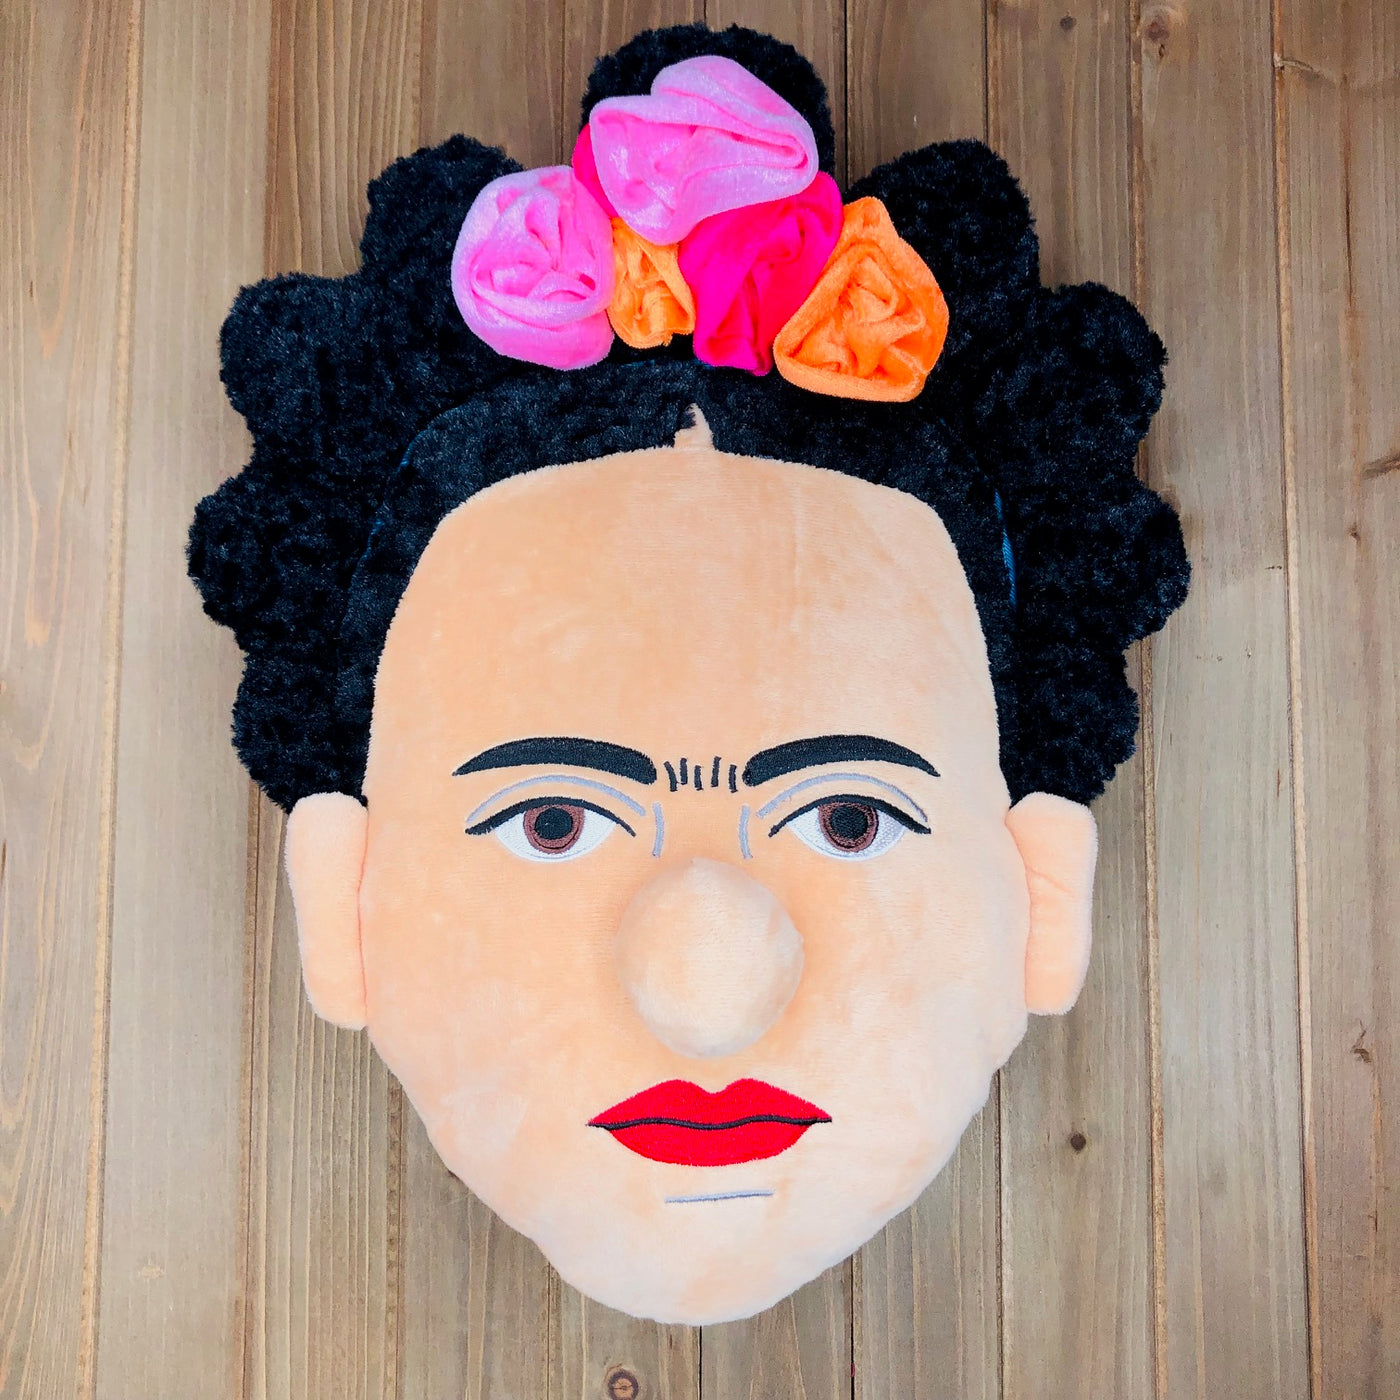 Plush Frida Kahlo head pillow pictured on wooden table.